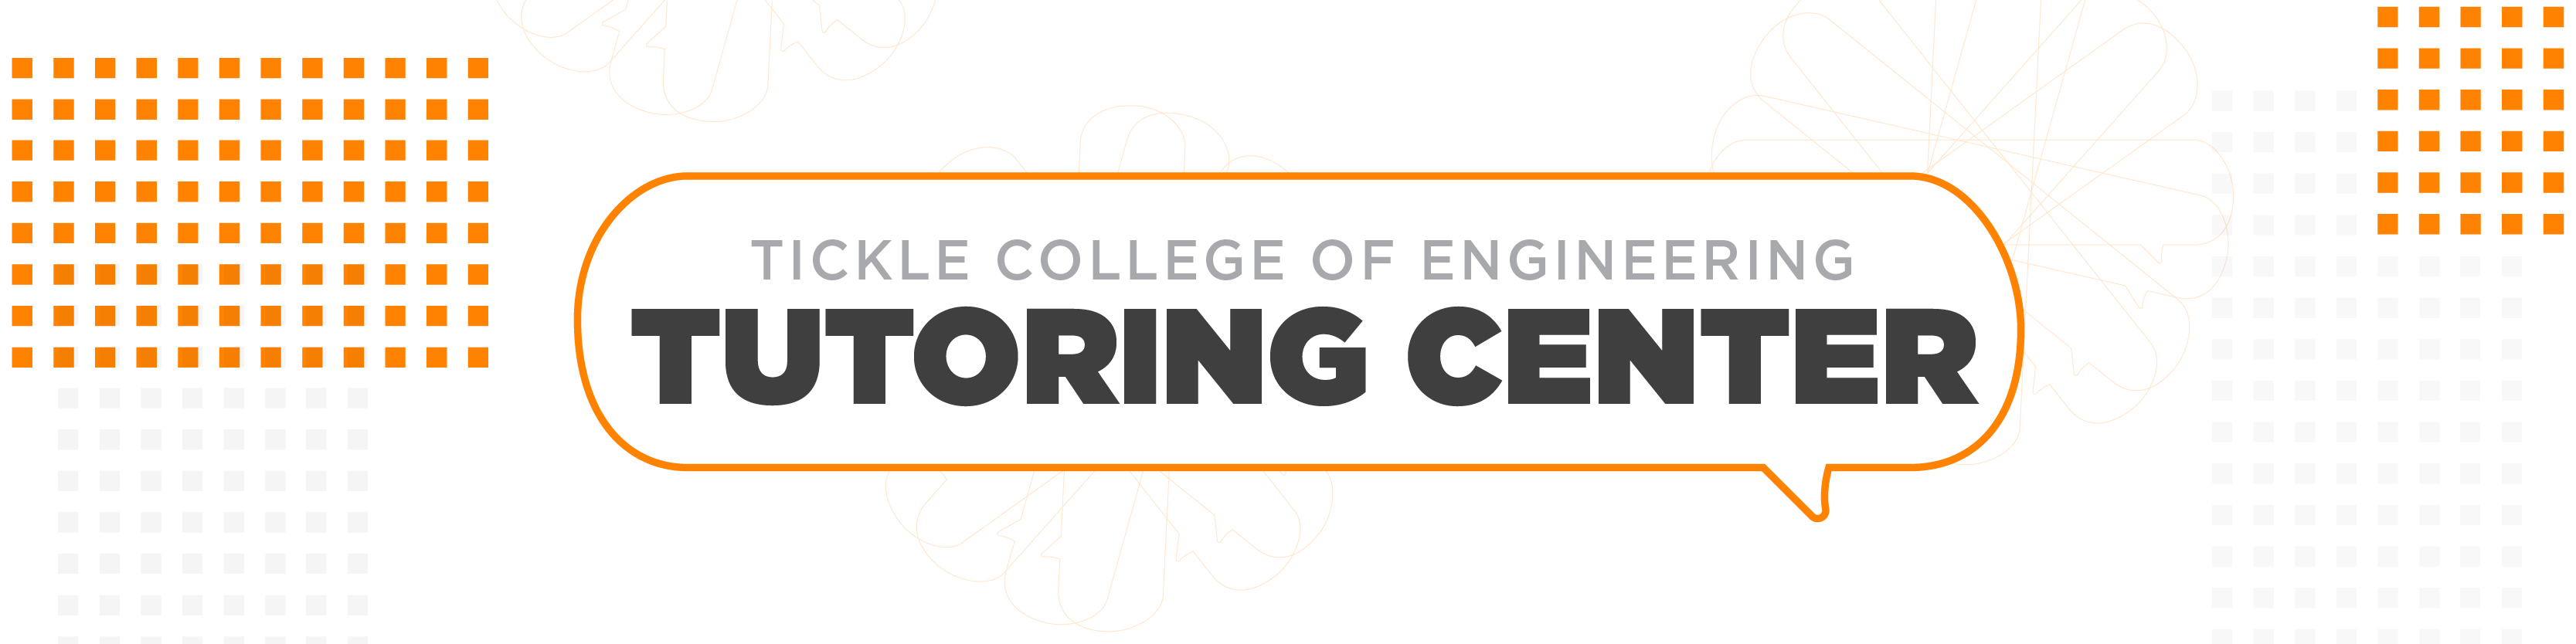 Become a peer learning assistant for the TCE Tutoring Center!